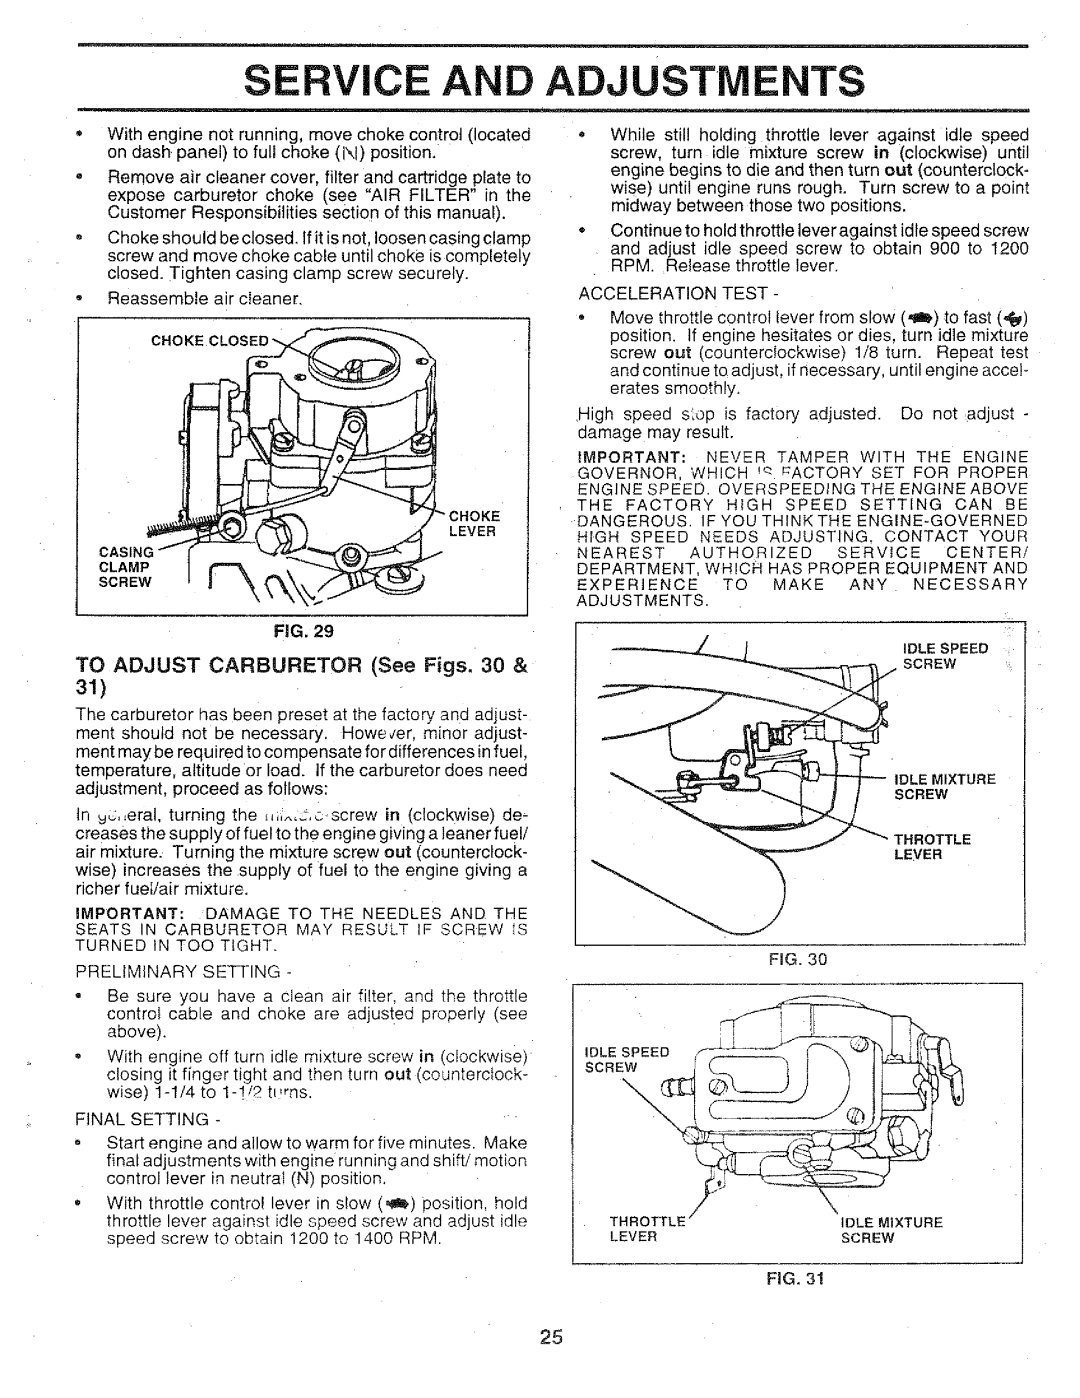 Sears 917.25147 owner manual Service Adjustments, Reassemble a rcleaner 